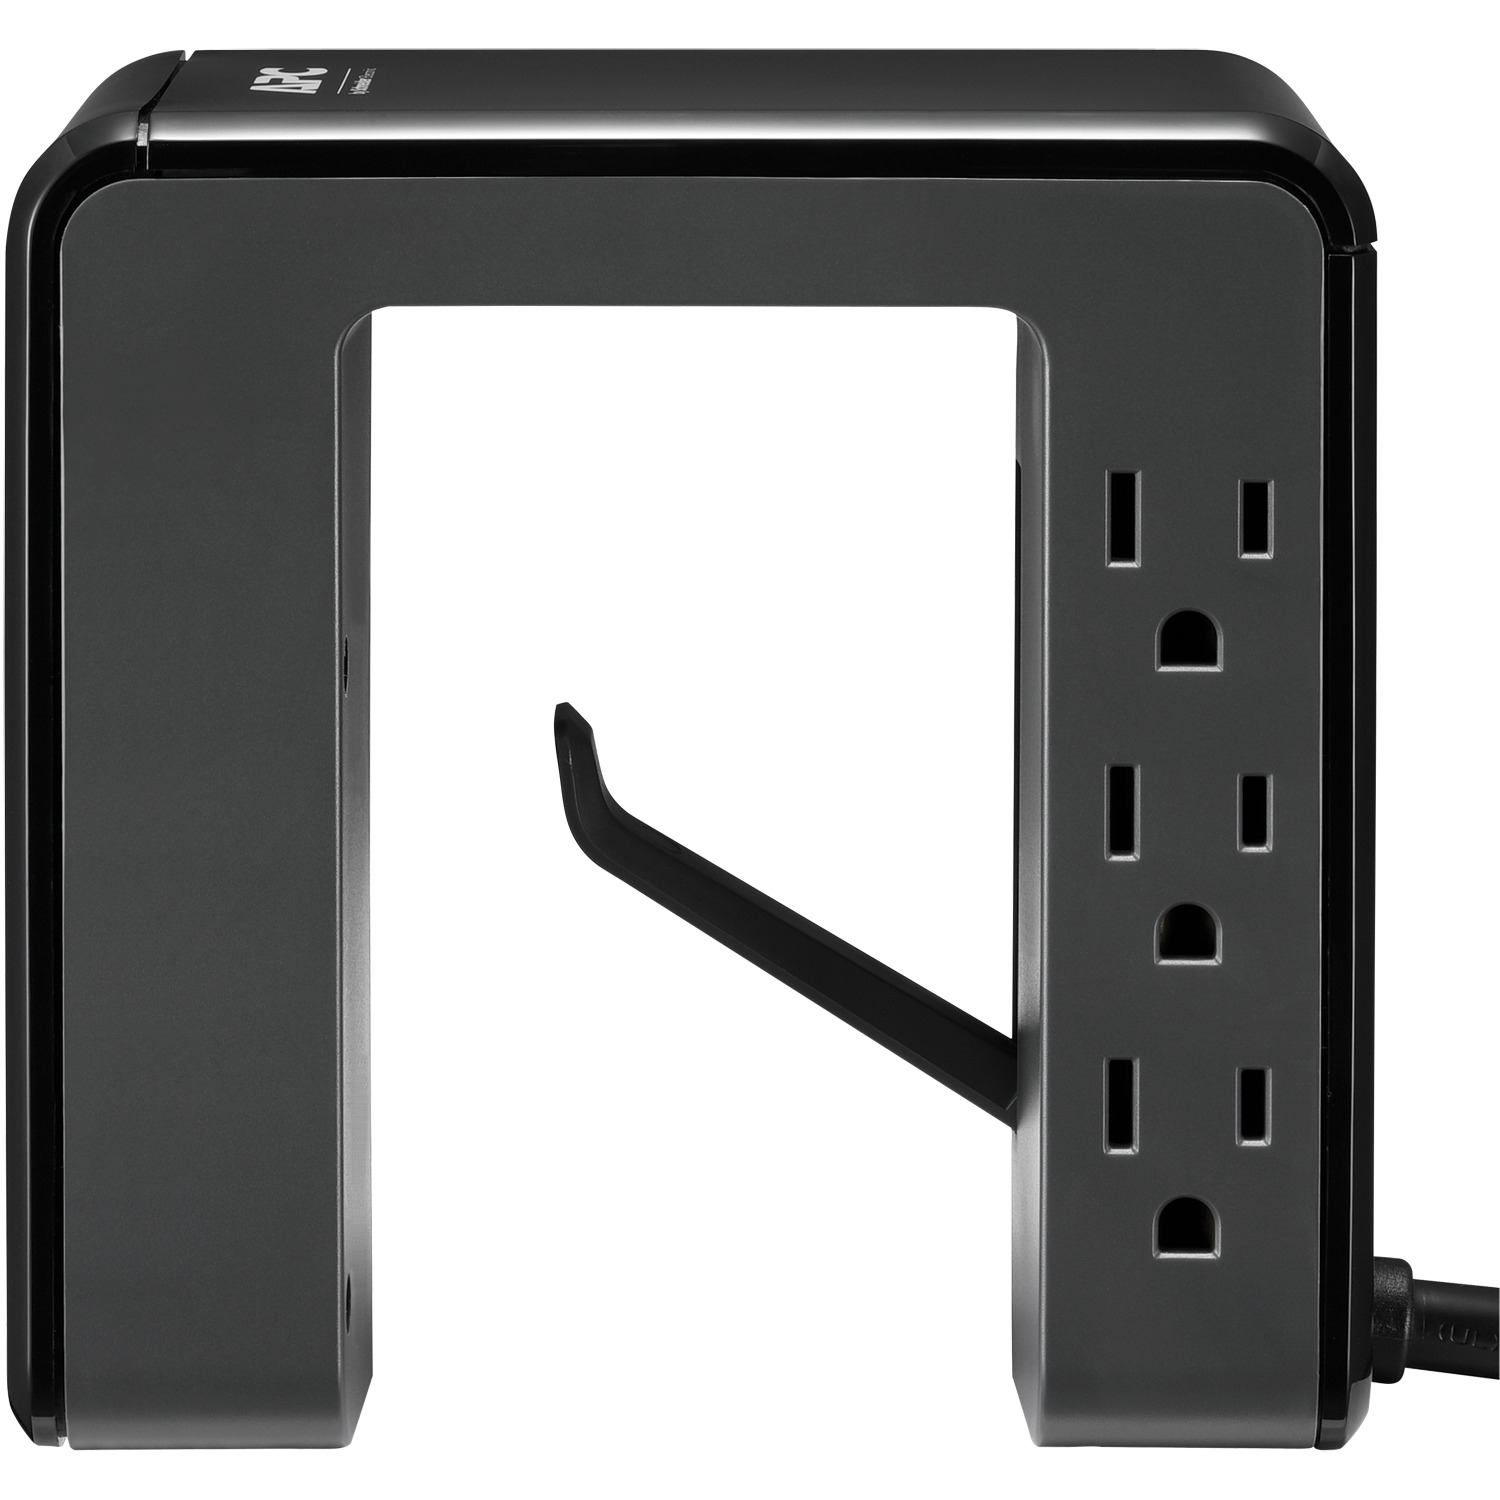 APC PE6U4 Essential SurgeArrest Desk-Mount Power Station with 6 Outlets and 4 USB Charging Ports (Black) - image 1 of 7